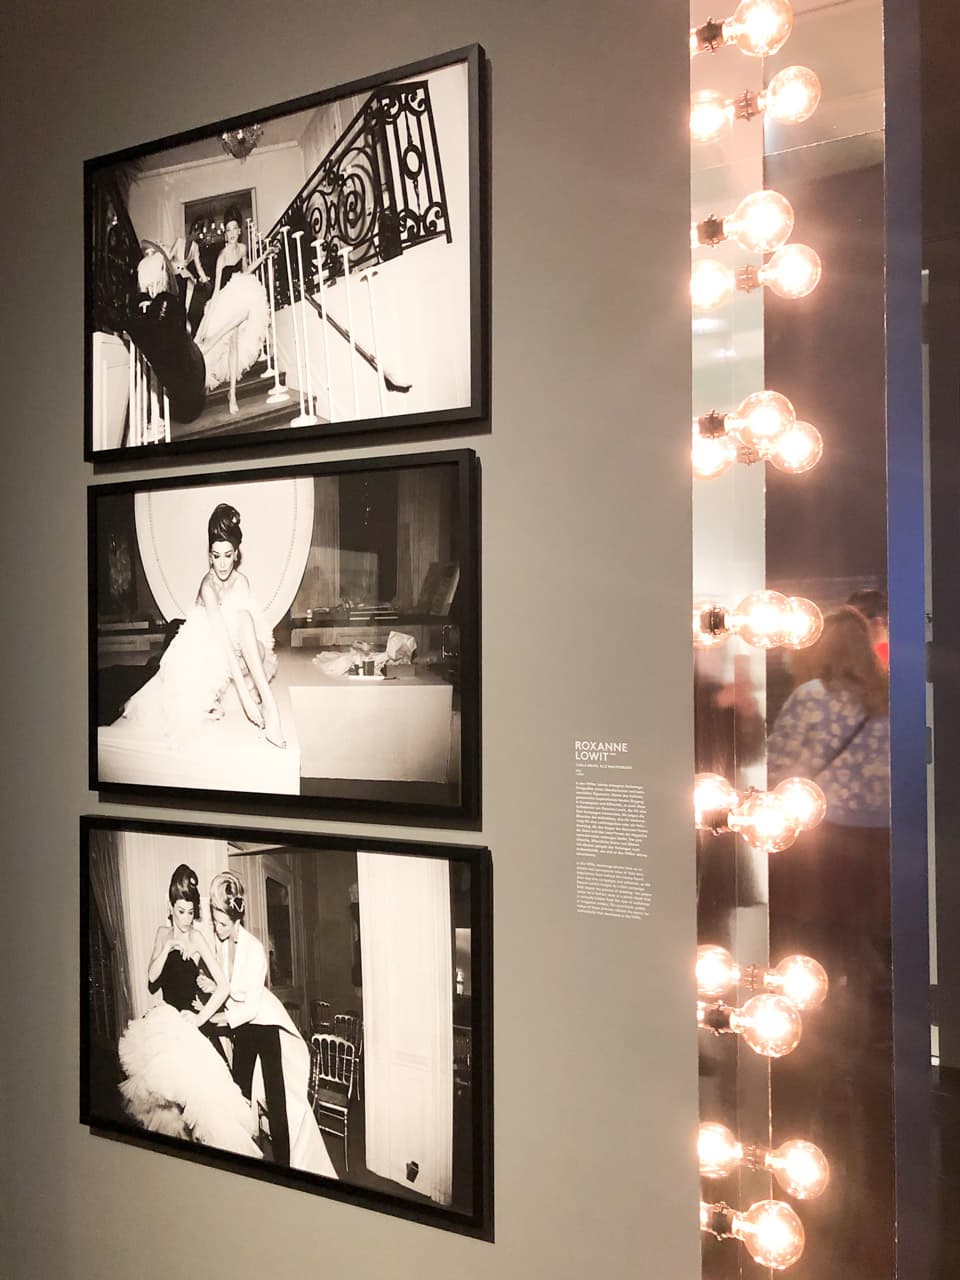 Three framed black and white photos of supermodels taken backstage of a fashion show